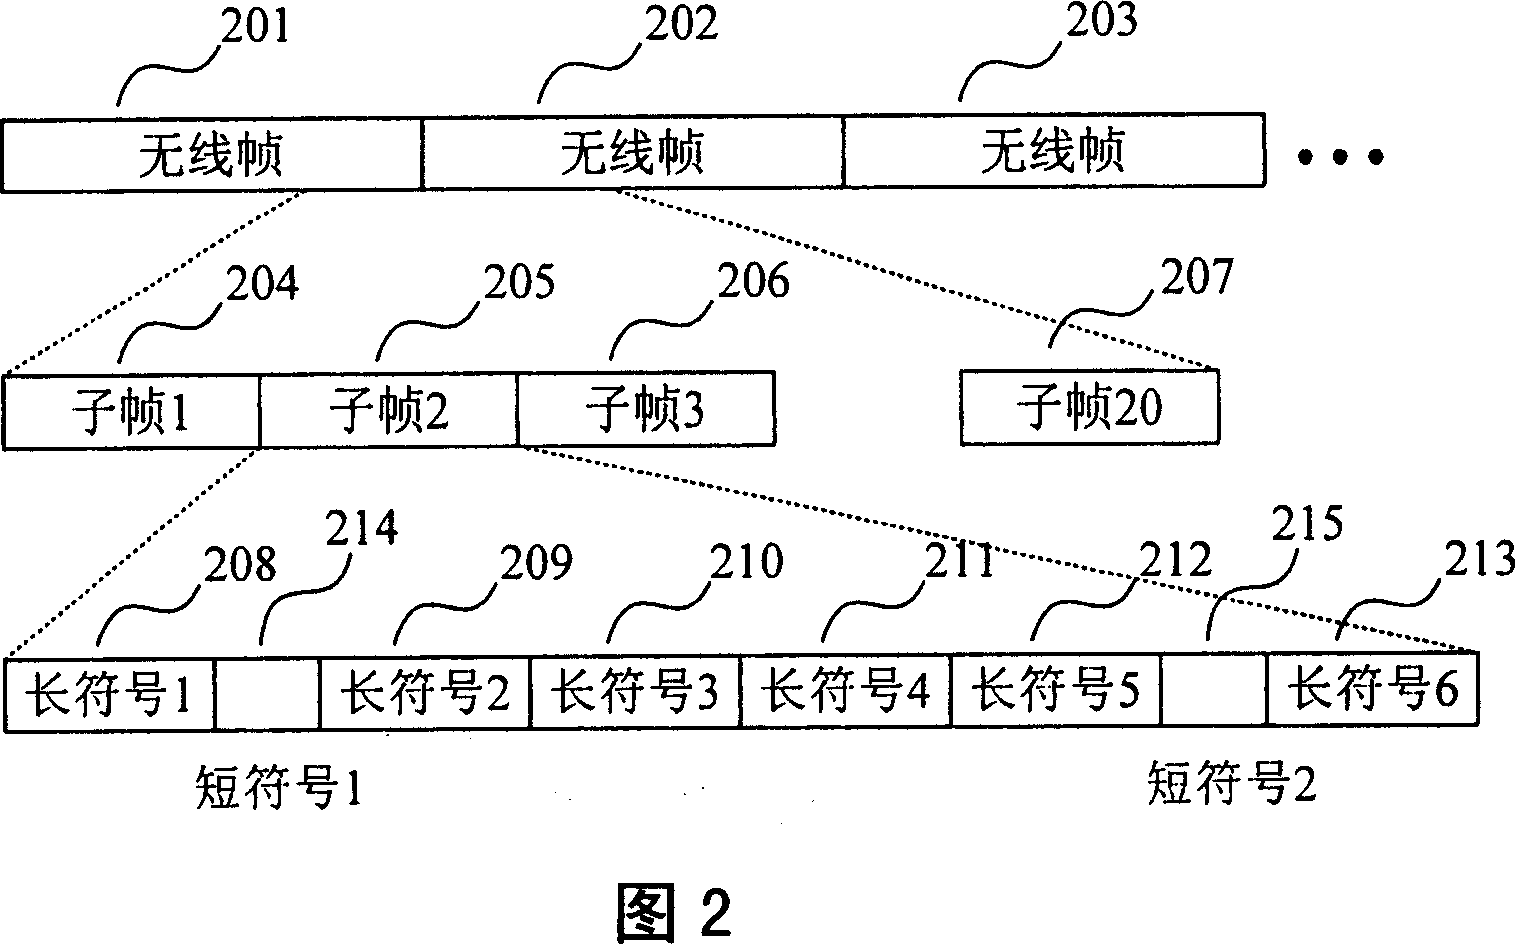 An equipment and method for indicating and distributing the channel resources in the wireless communication system